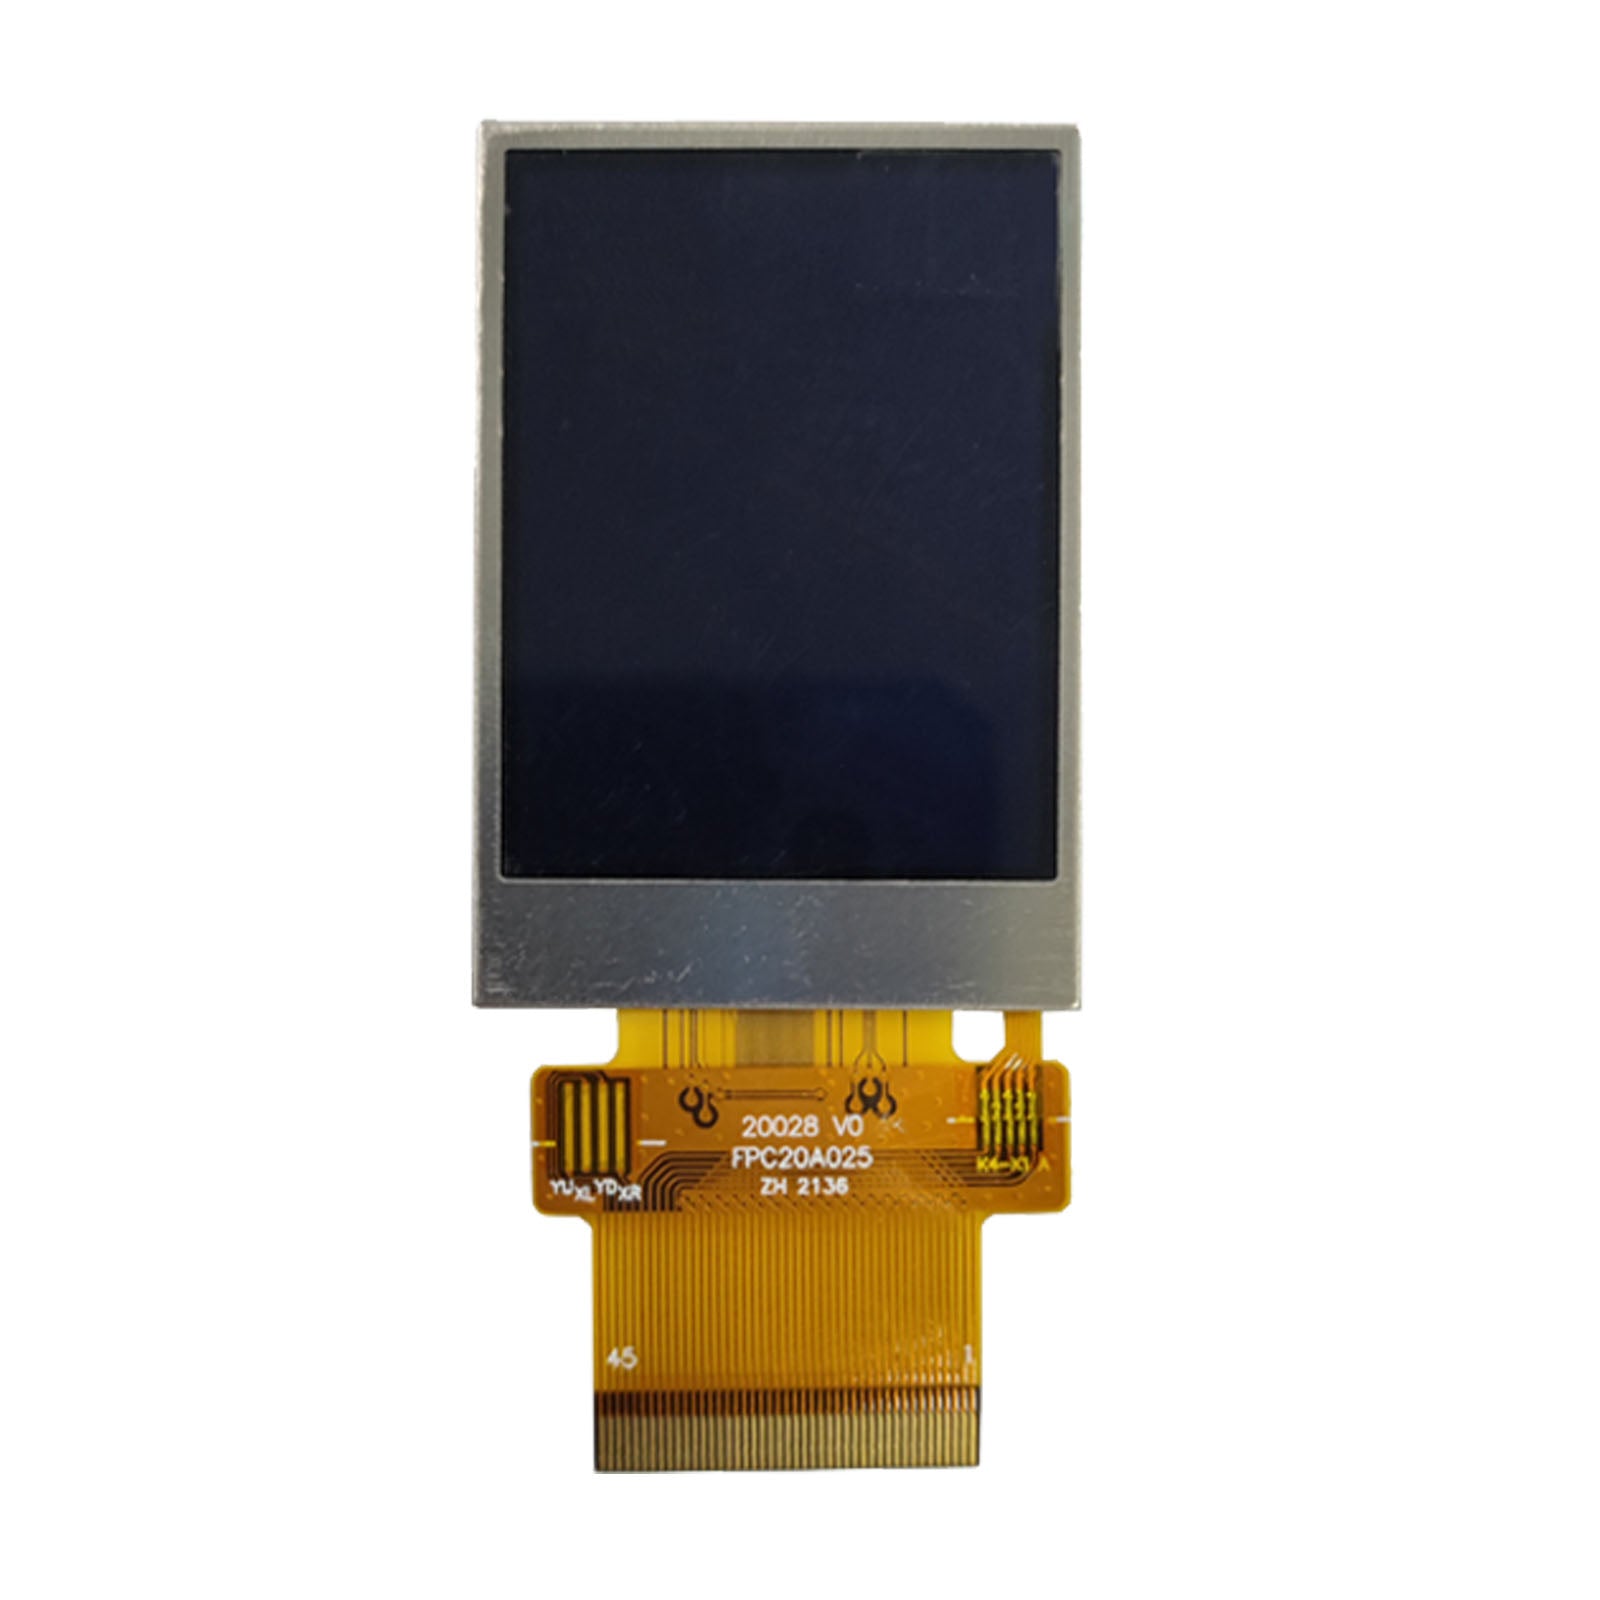 2.0 inch 240x320 TFT transflective display panel with SPI, MCU, and RGB interfaces